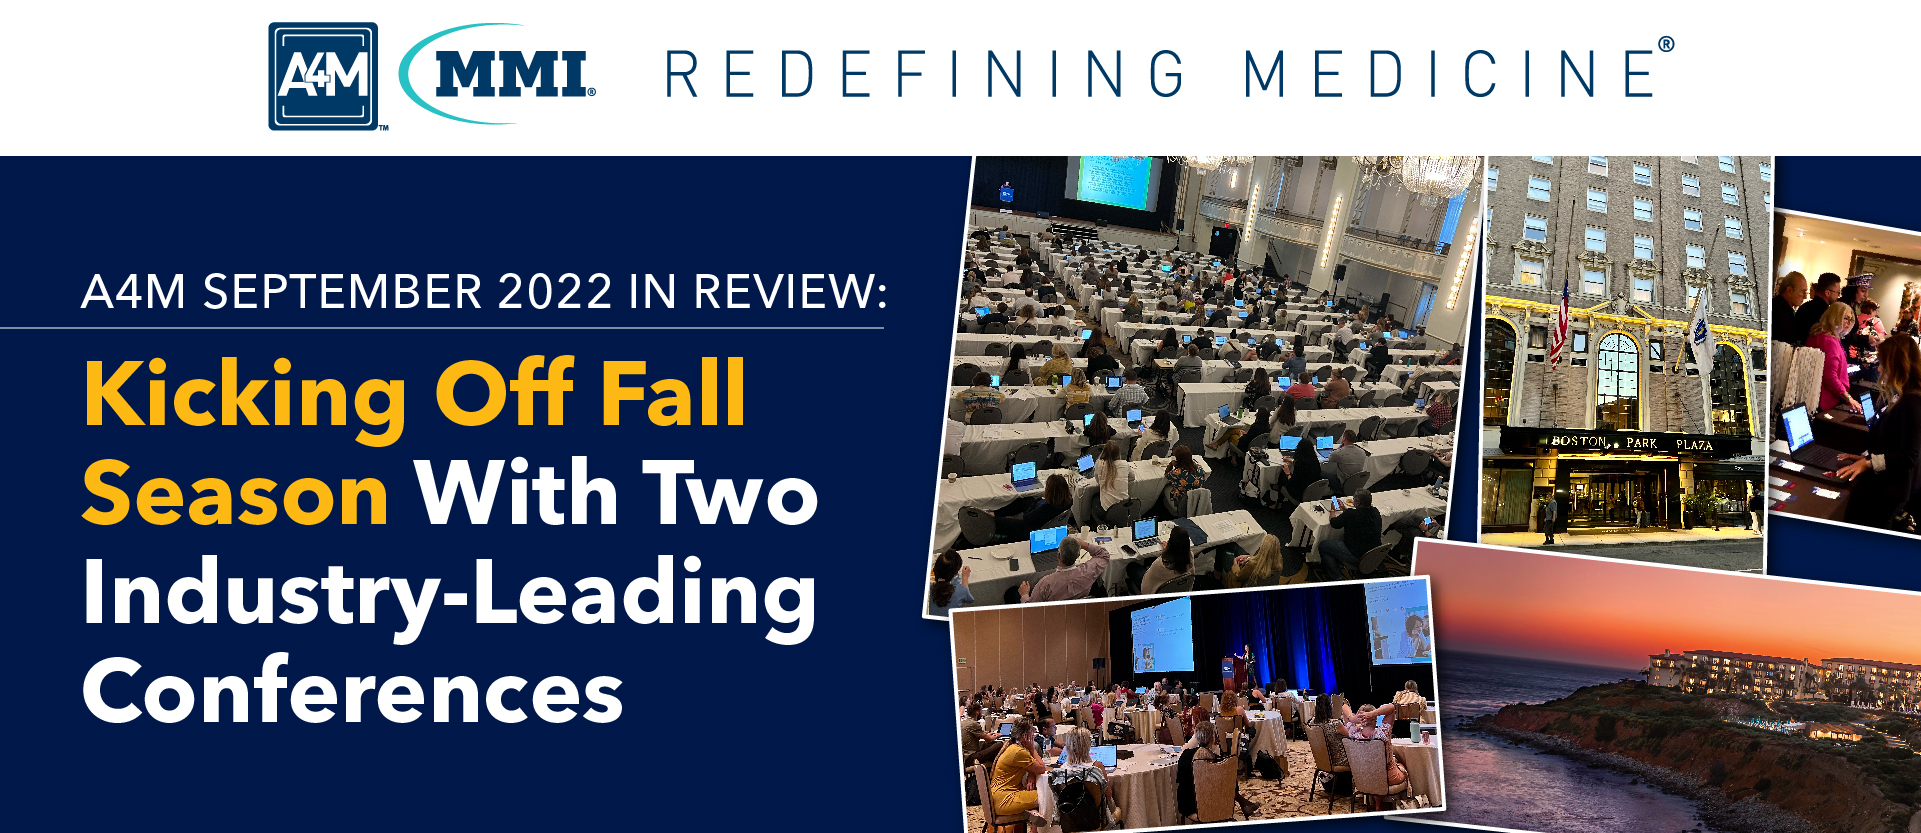 A4M September 2022 In Review Kicking Off Fall Season With Two Industry